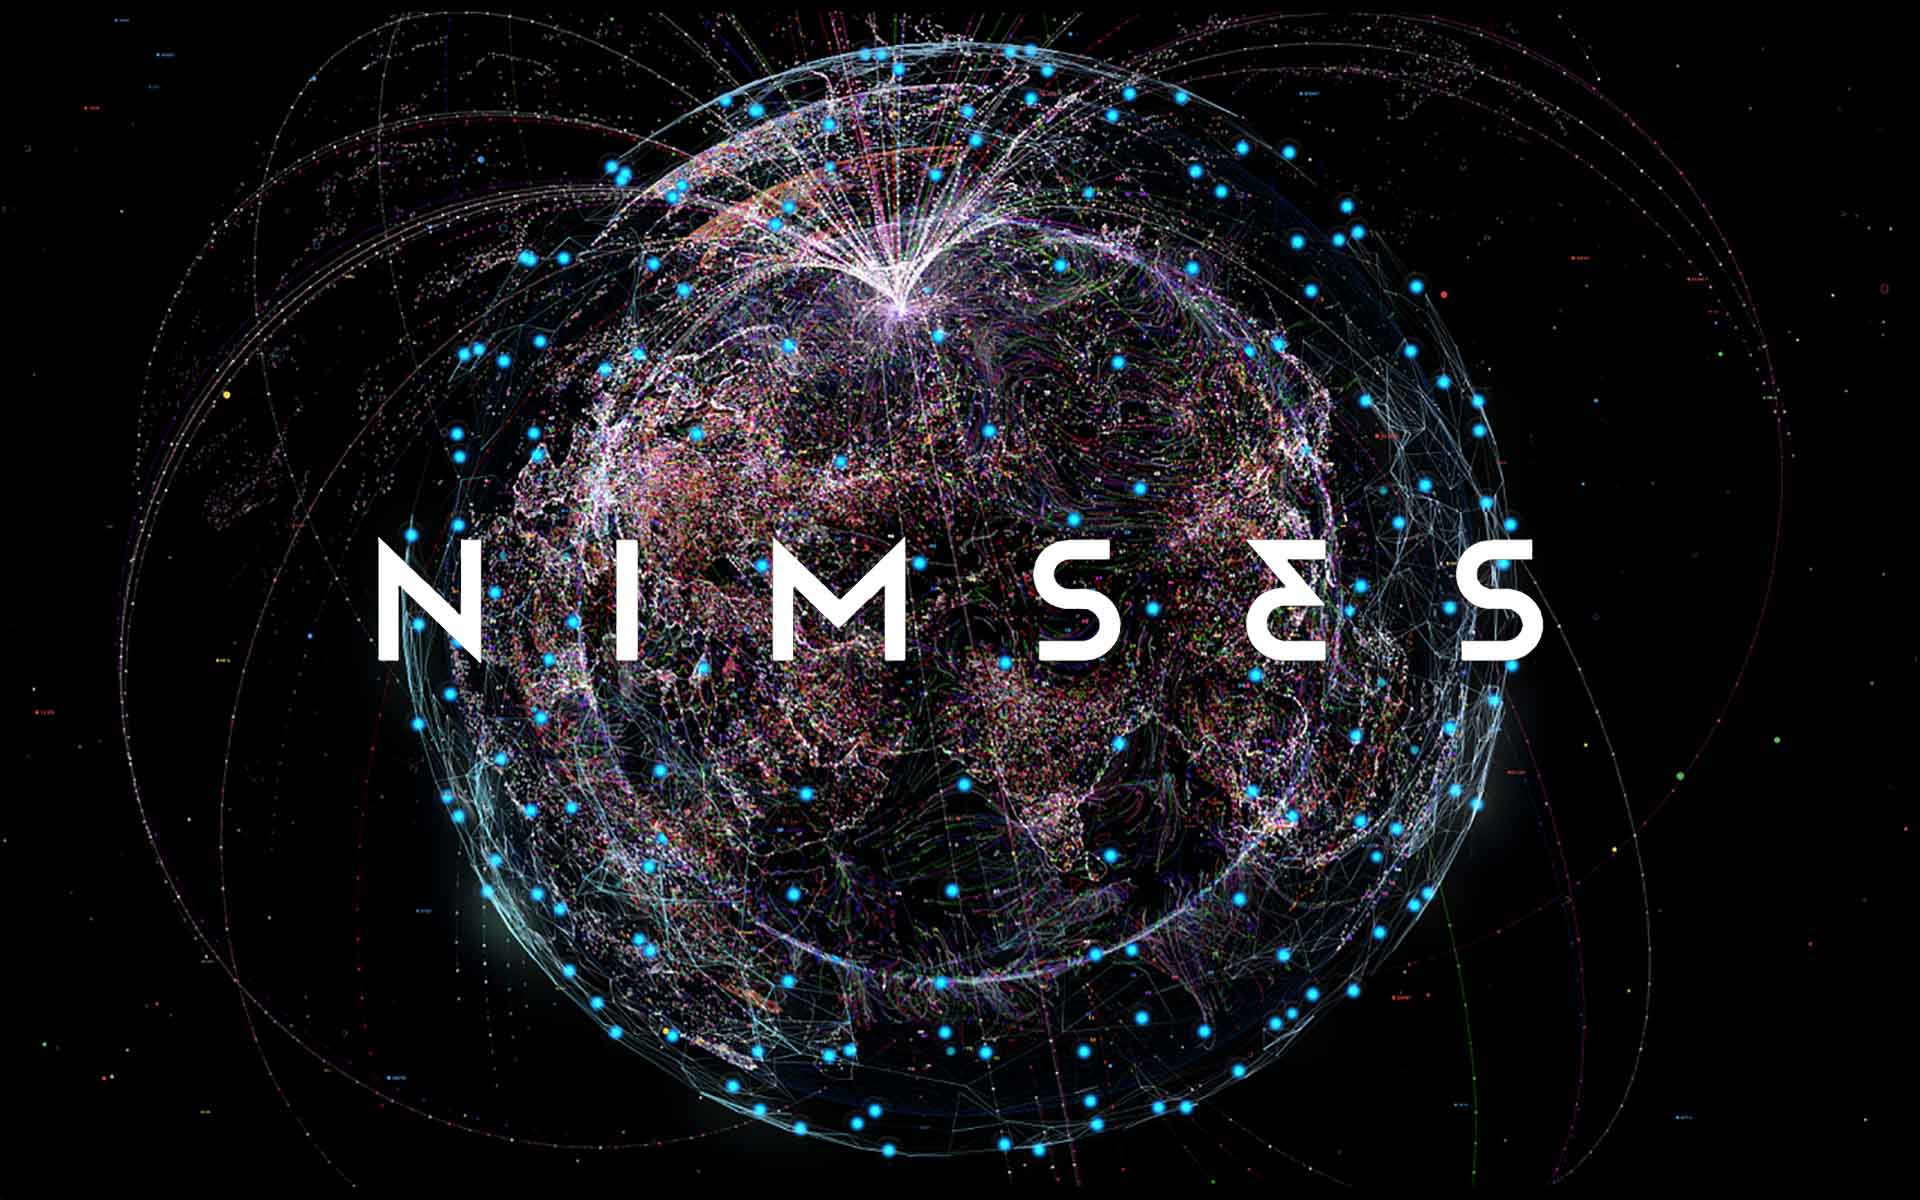 Meet Nimses — Global Treasury of Human Lifetime. A Singular Technology to Deal With Plural Planetary Challenges.